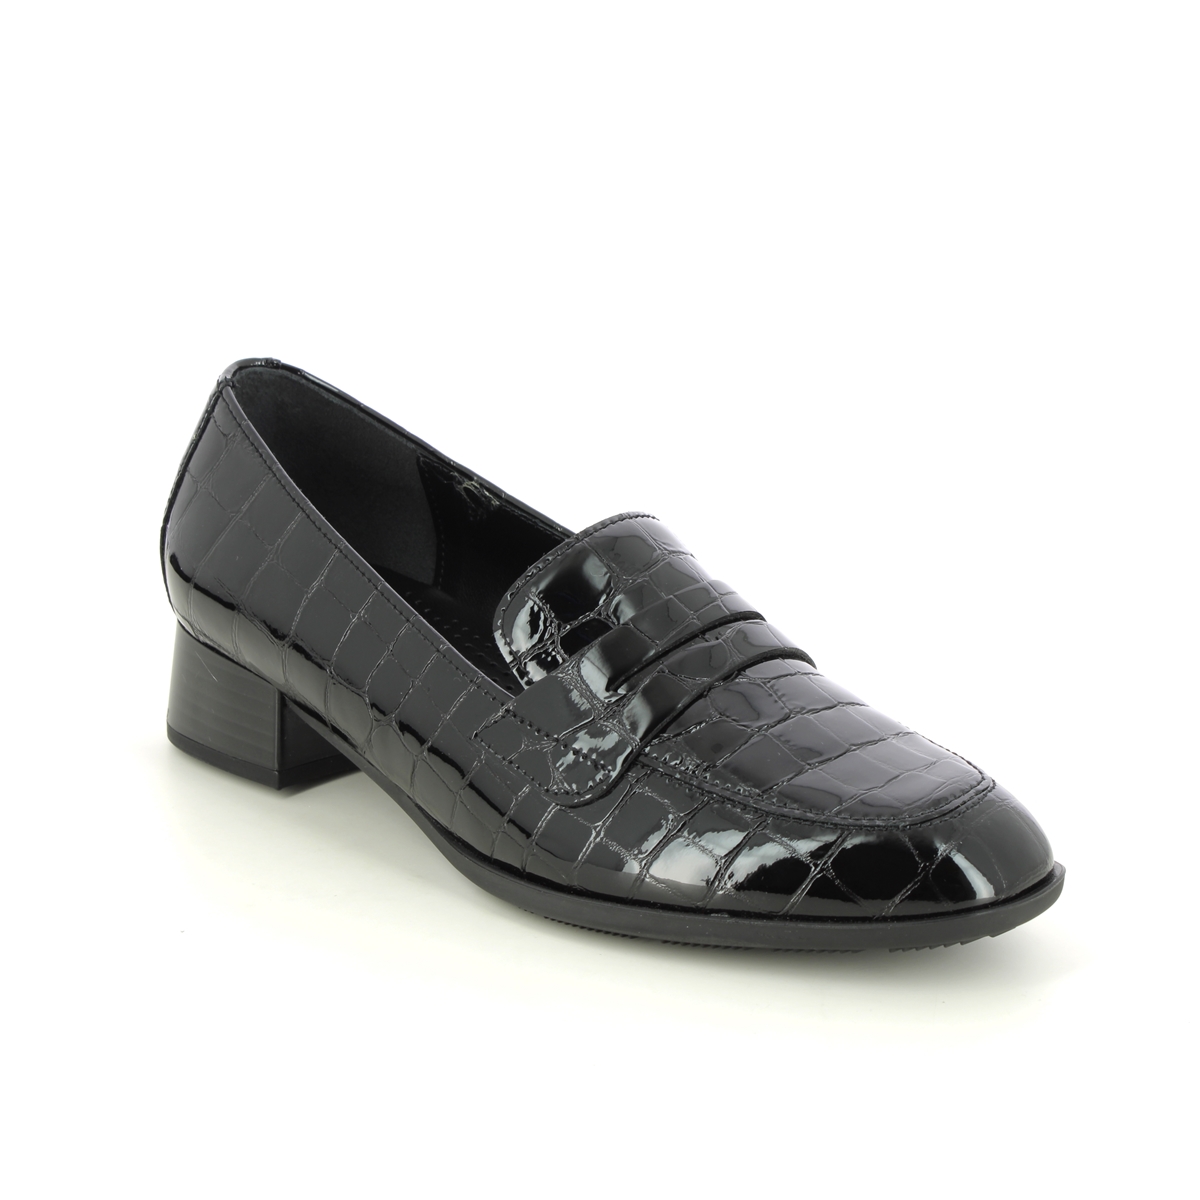 Gabor Right Penny Black Croc Womens Loafers 35.280.97 In Size 7 In Plain Black Croc Effect  Womens Loafers In Soft Black Croc Effect Leather